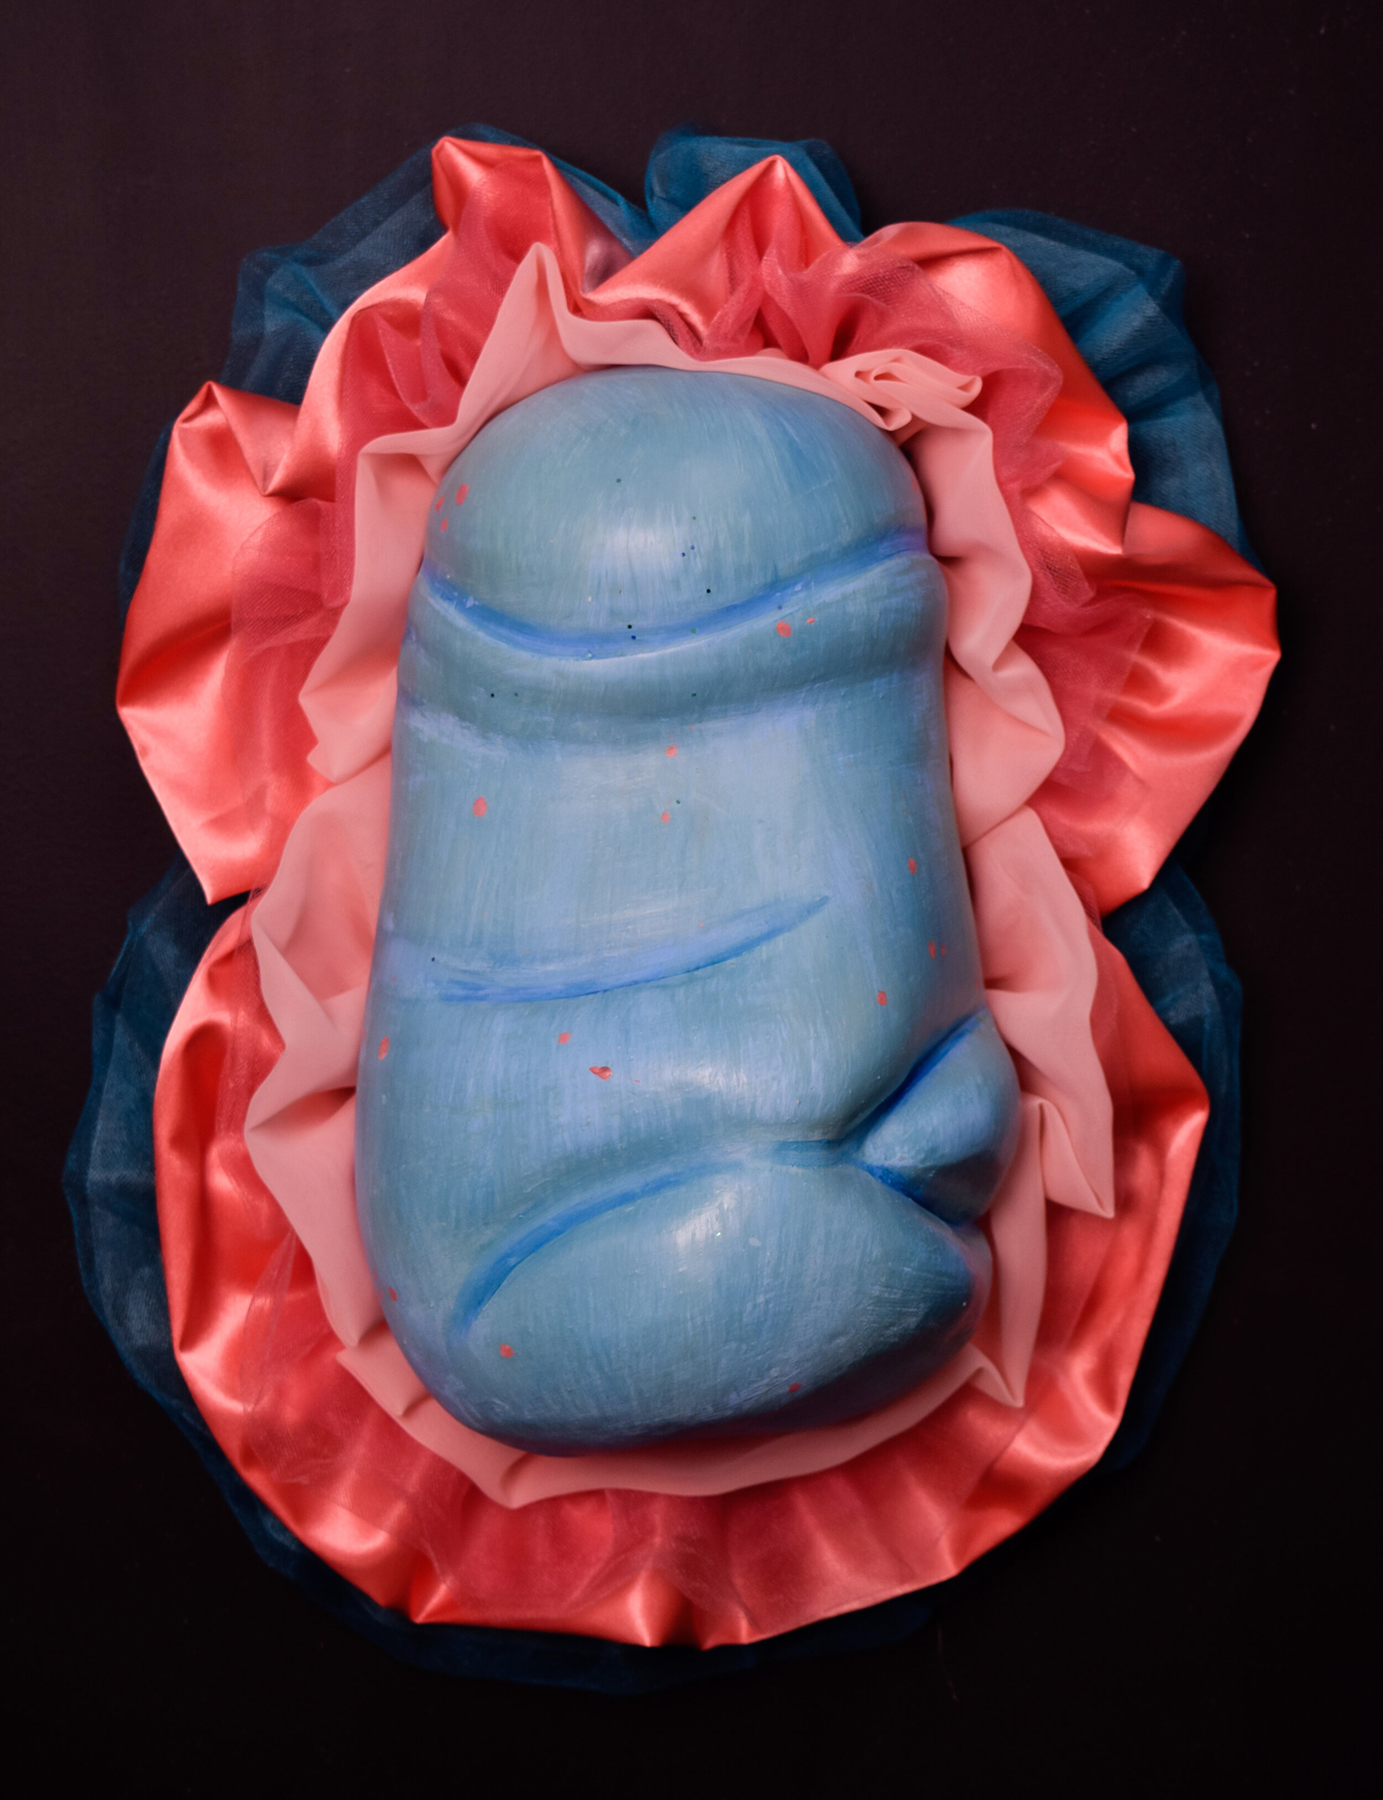 Ceramic sculpture of male genitalia on a fabric pillow, courtesy of the artist